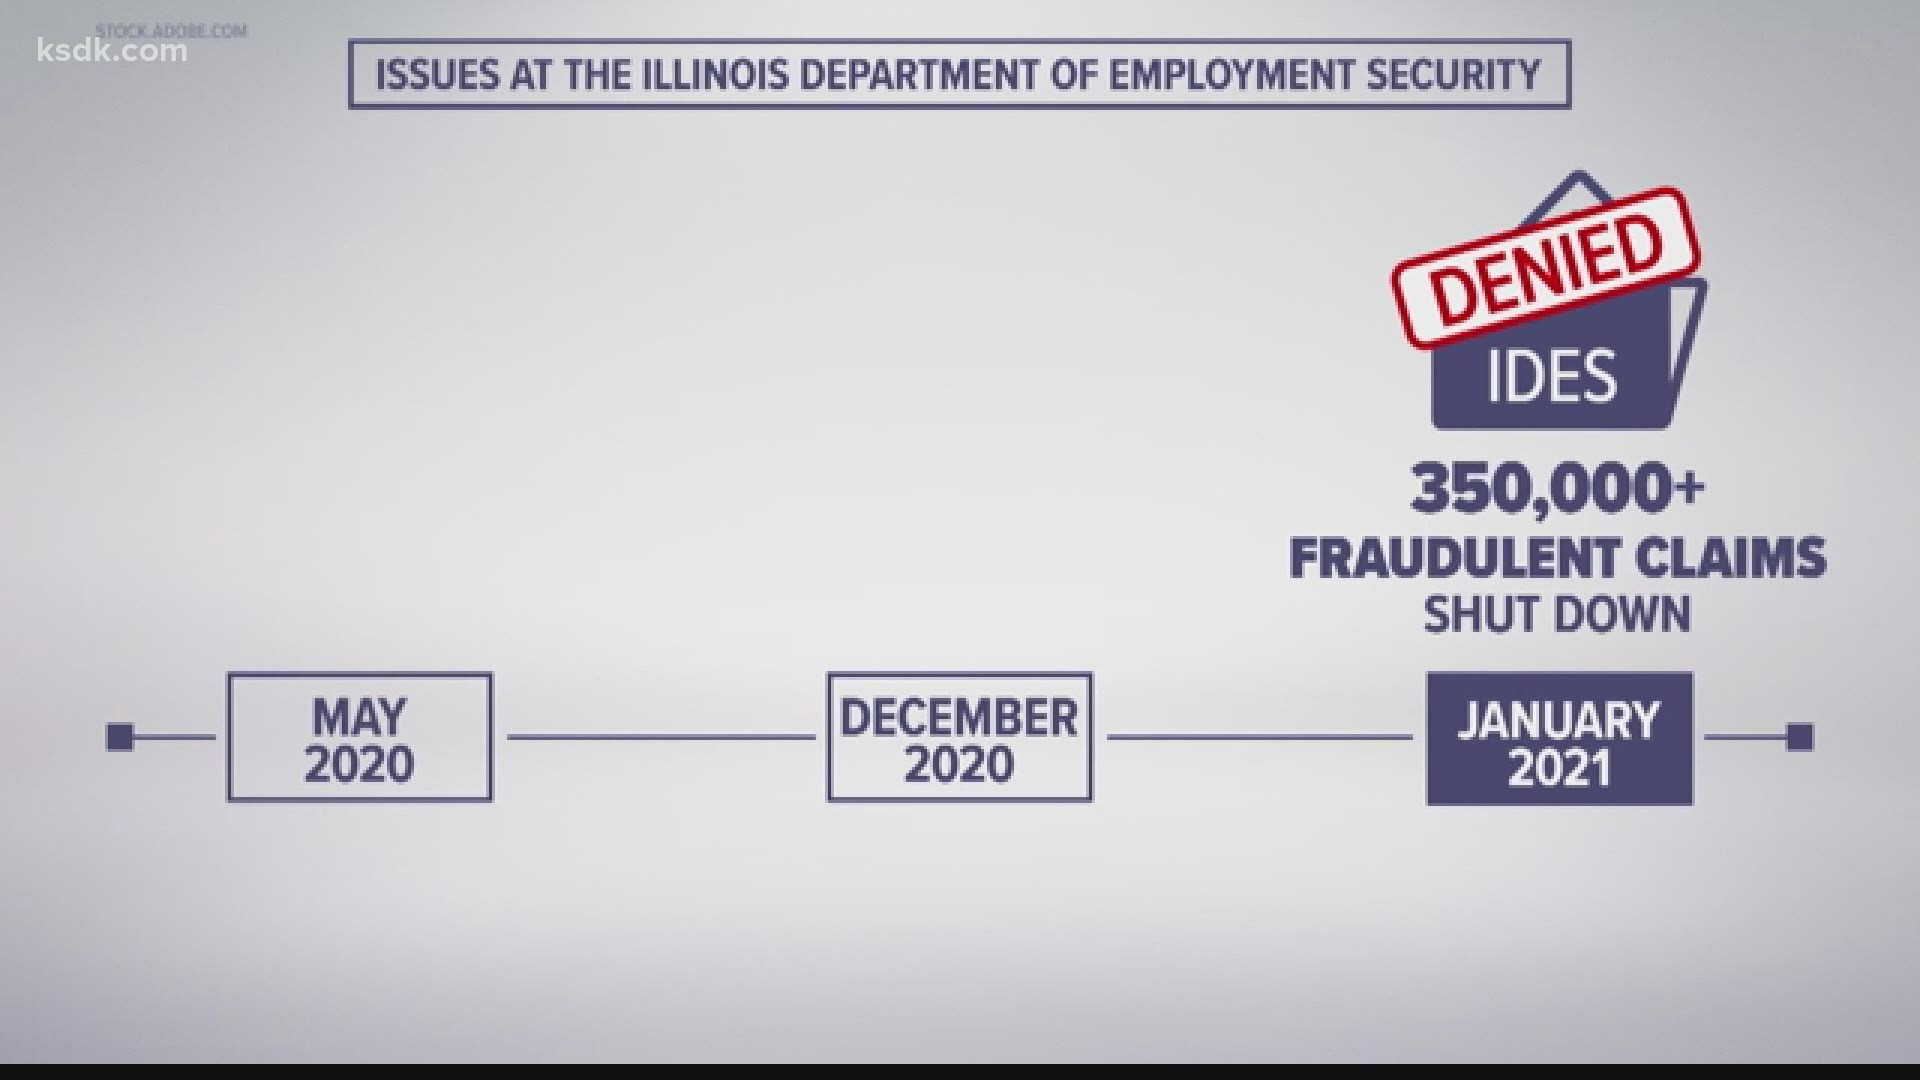 Illinois' systems leaked personal data throughout the year to identity thieves. Letters from the state asked victims to pay back what the scammers stole